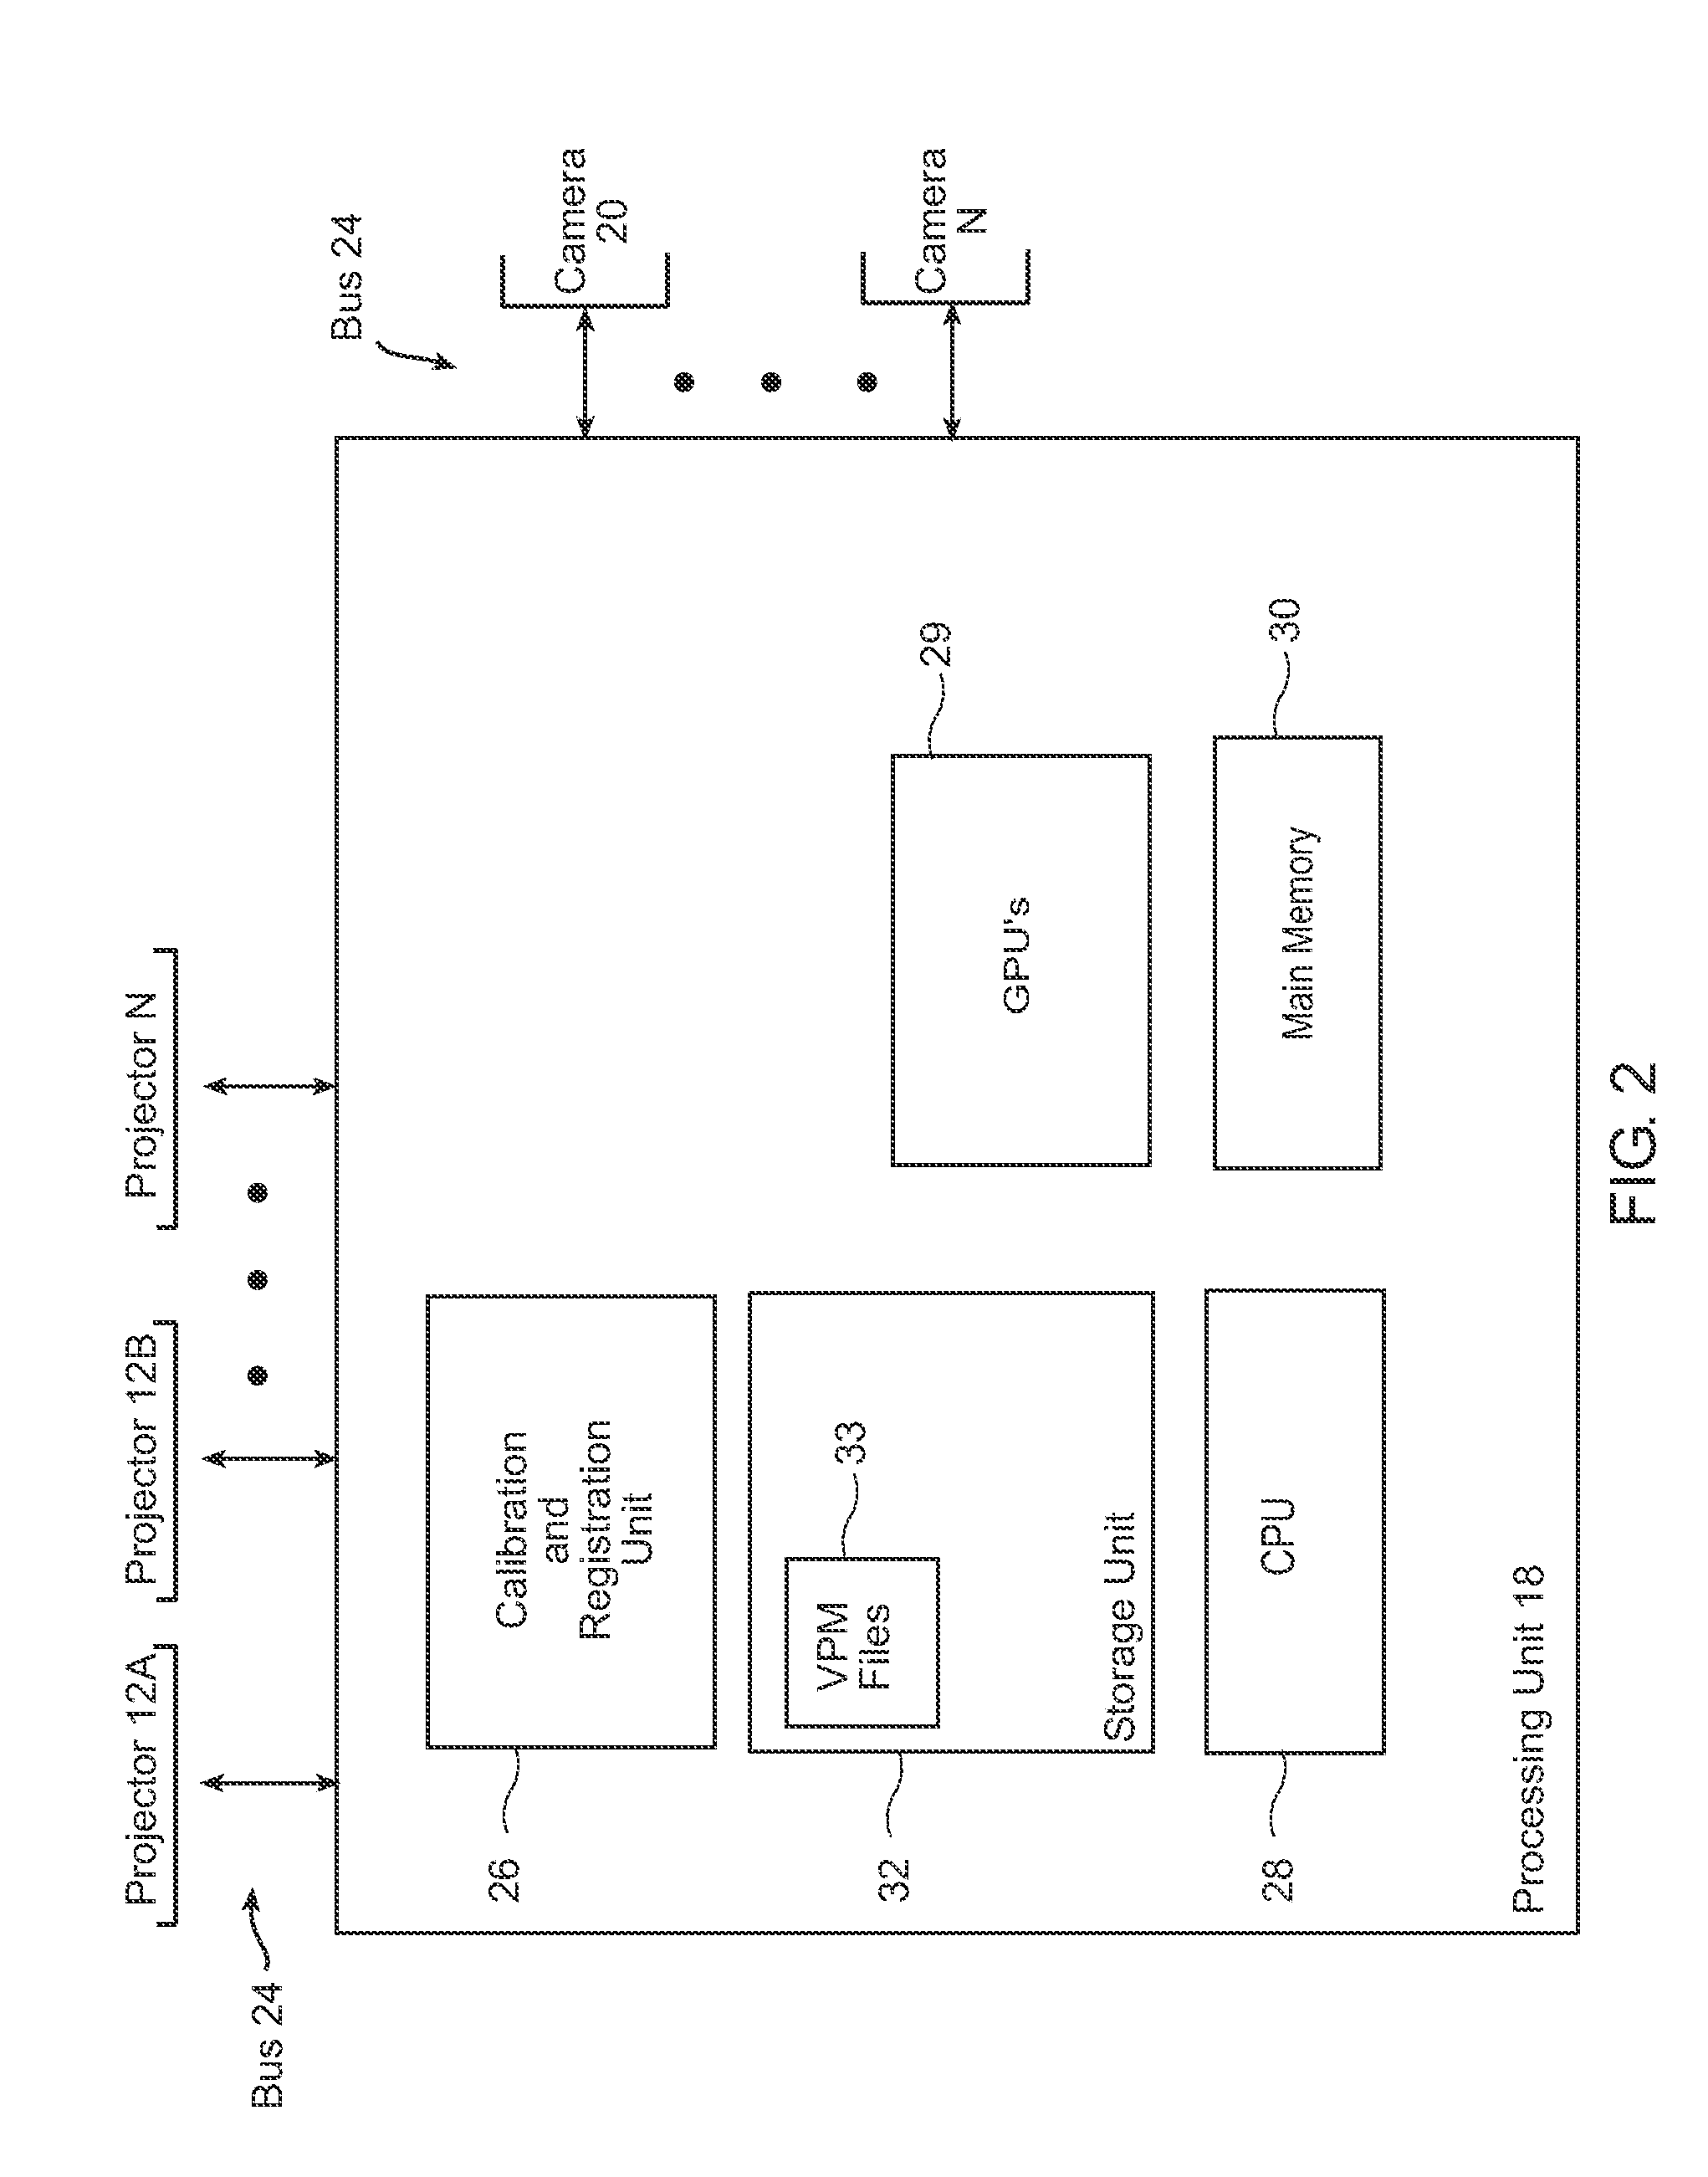 Method and Apparatus for Determining the Best Blending of Overlapped Portions of Projected Images